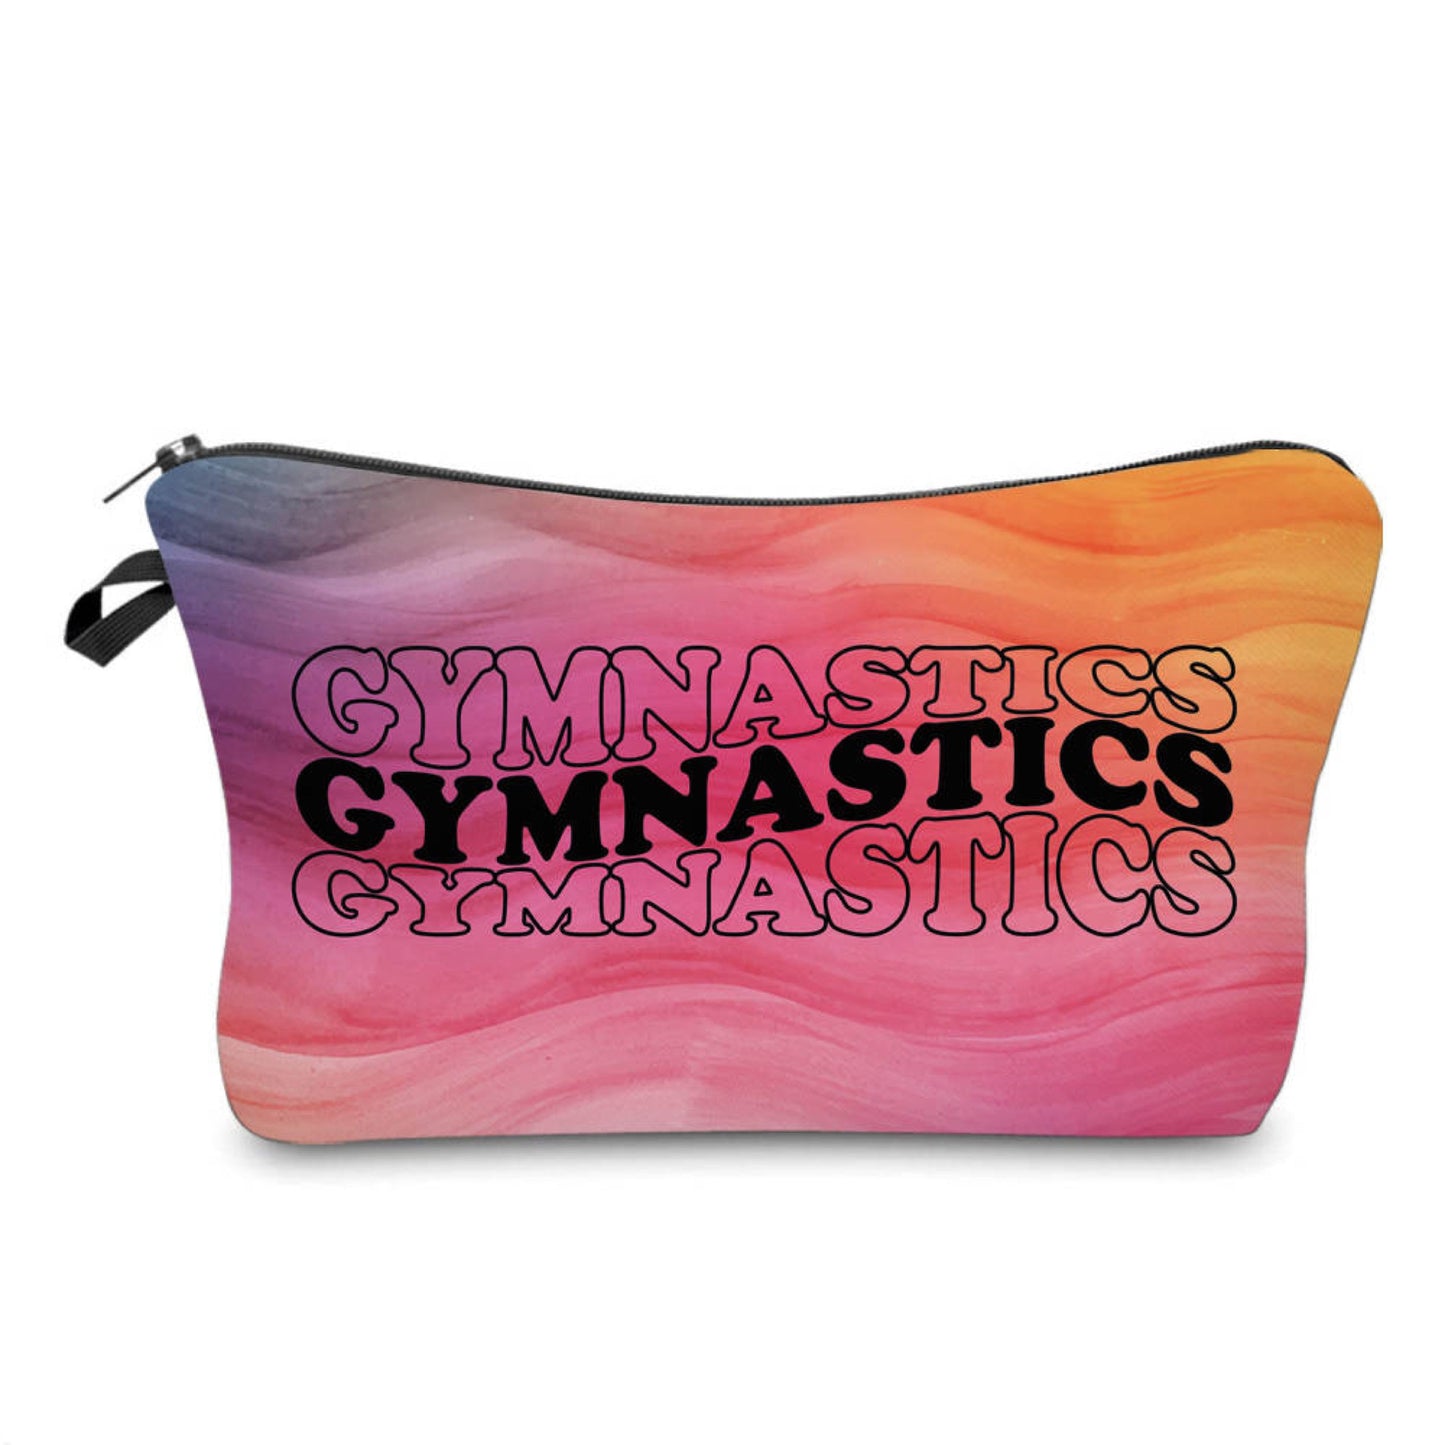 Gymnastics - Water-Resistant Multi-Use Pouch